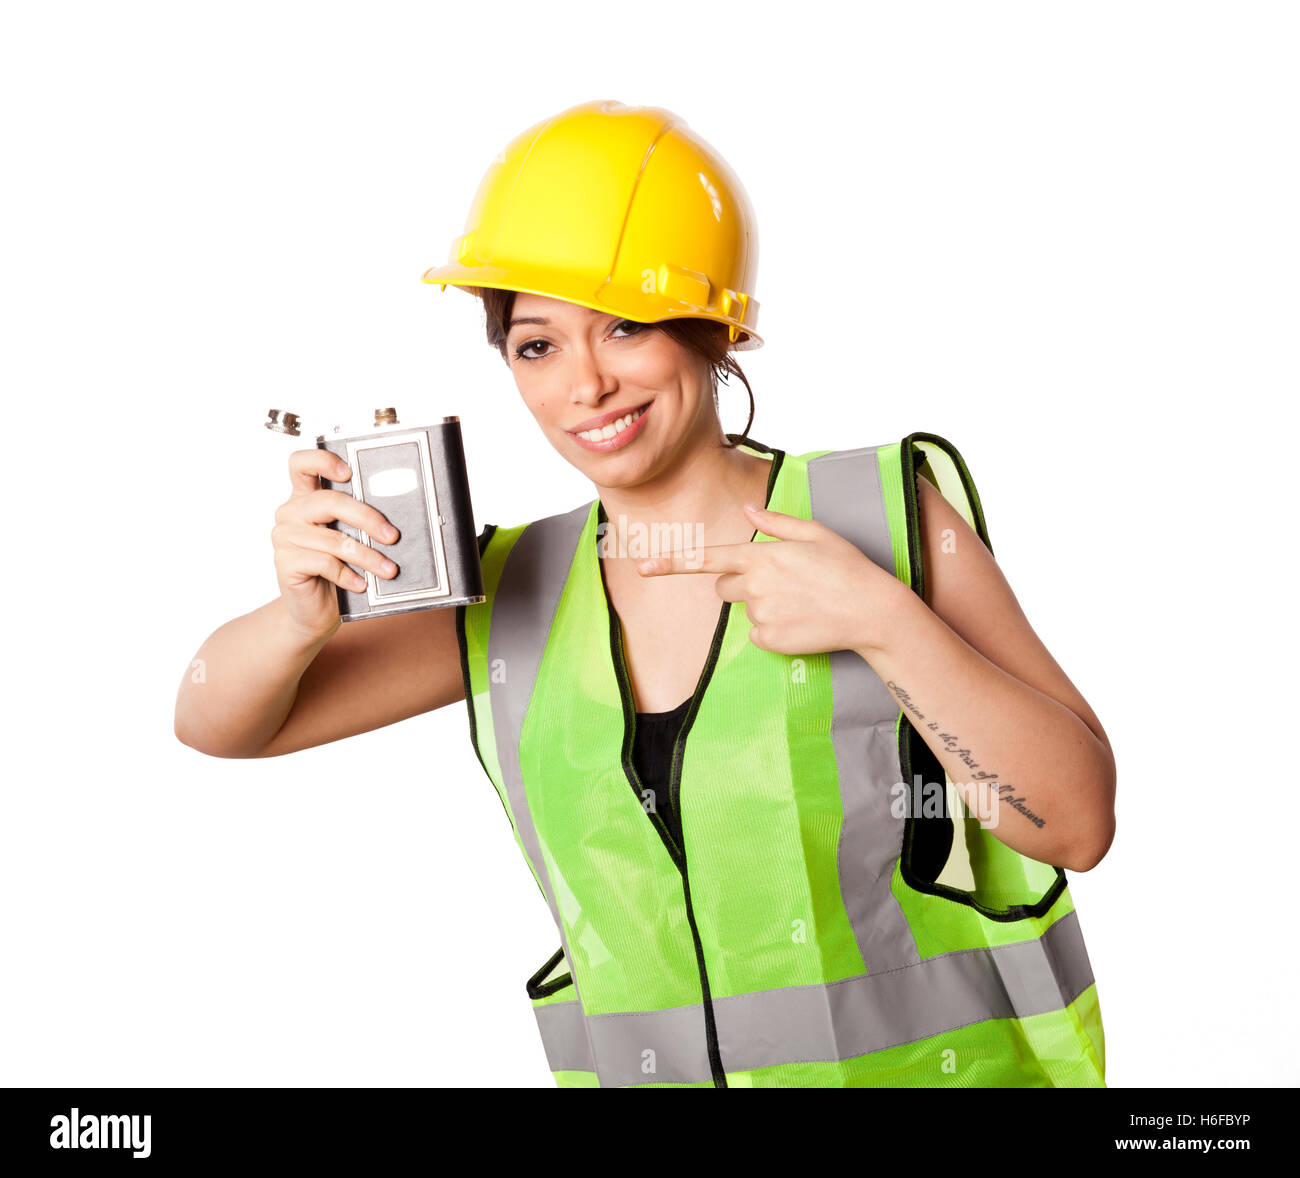 Caucasian young adult woman in her mid 20s wearing reflective yellow safety helmet and safety vest, raising a hip flask while be Stock Photo